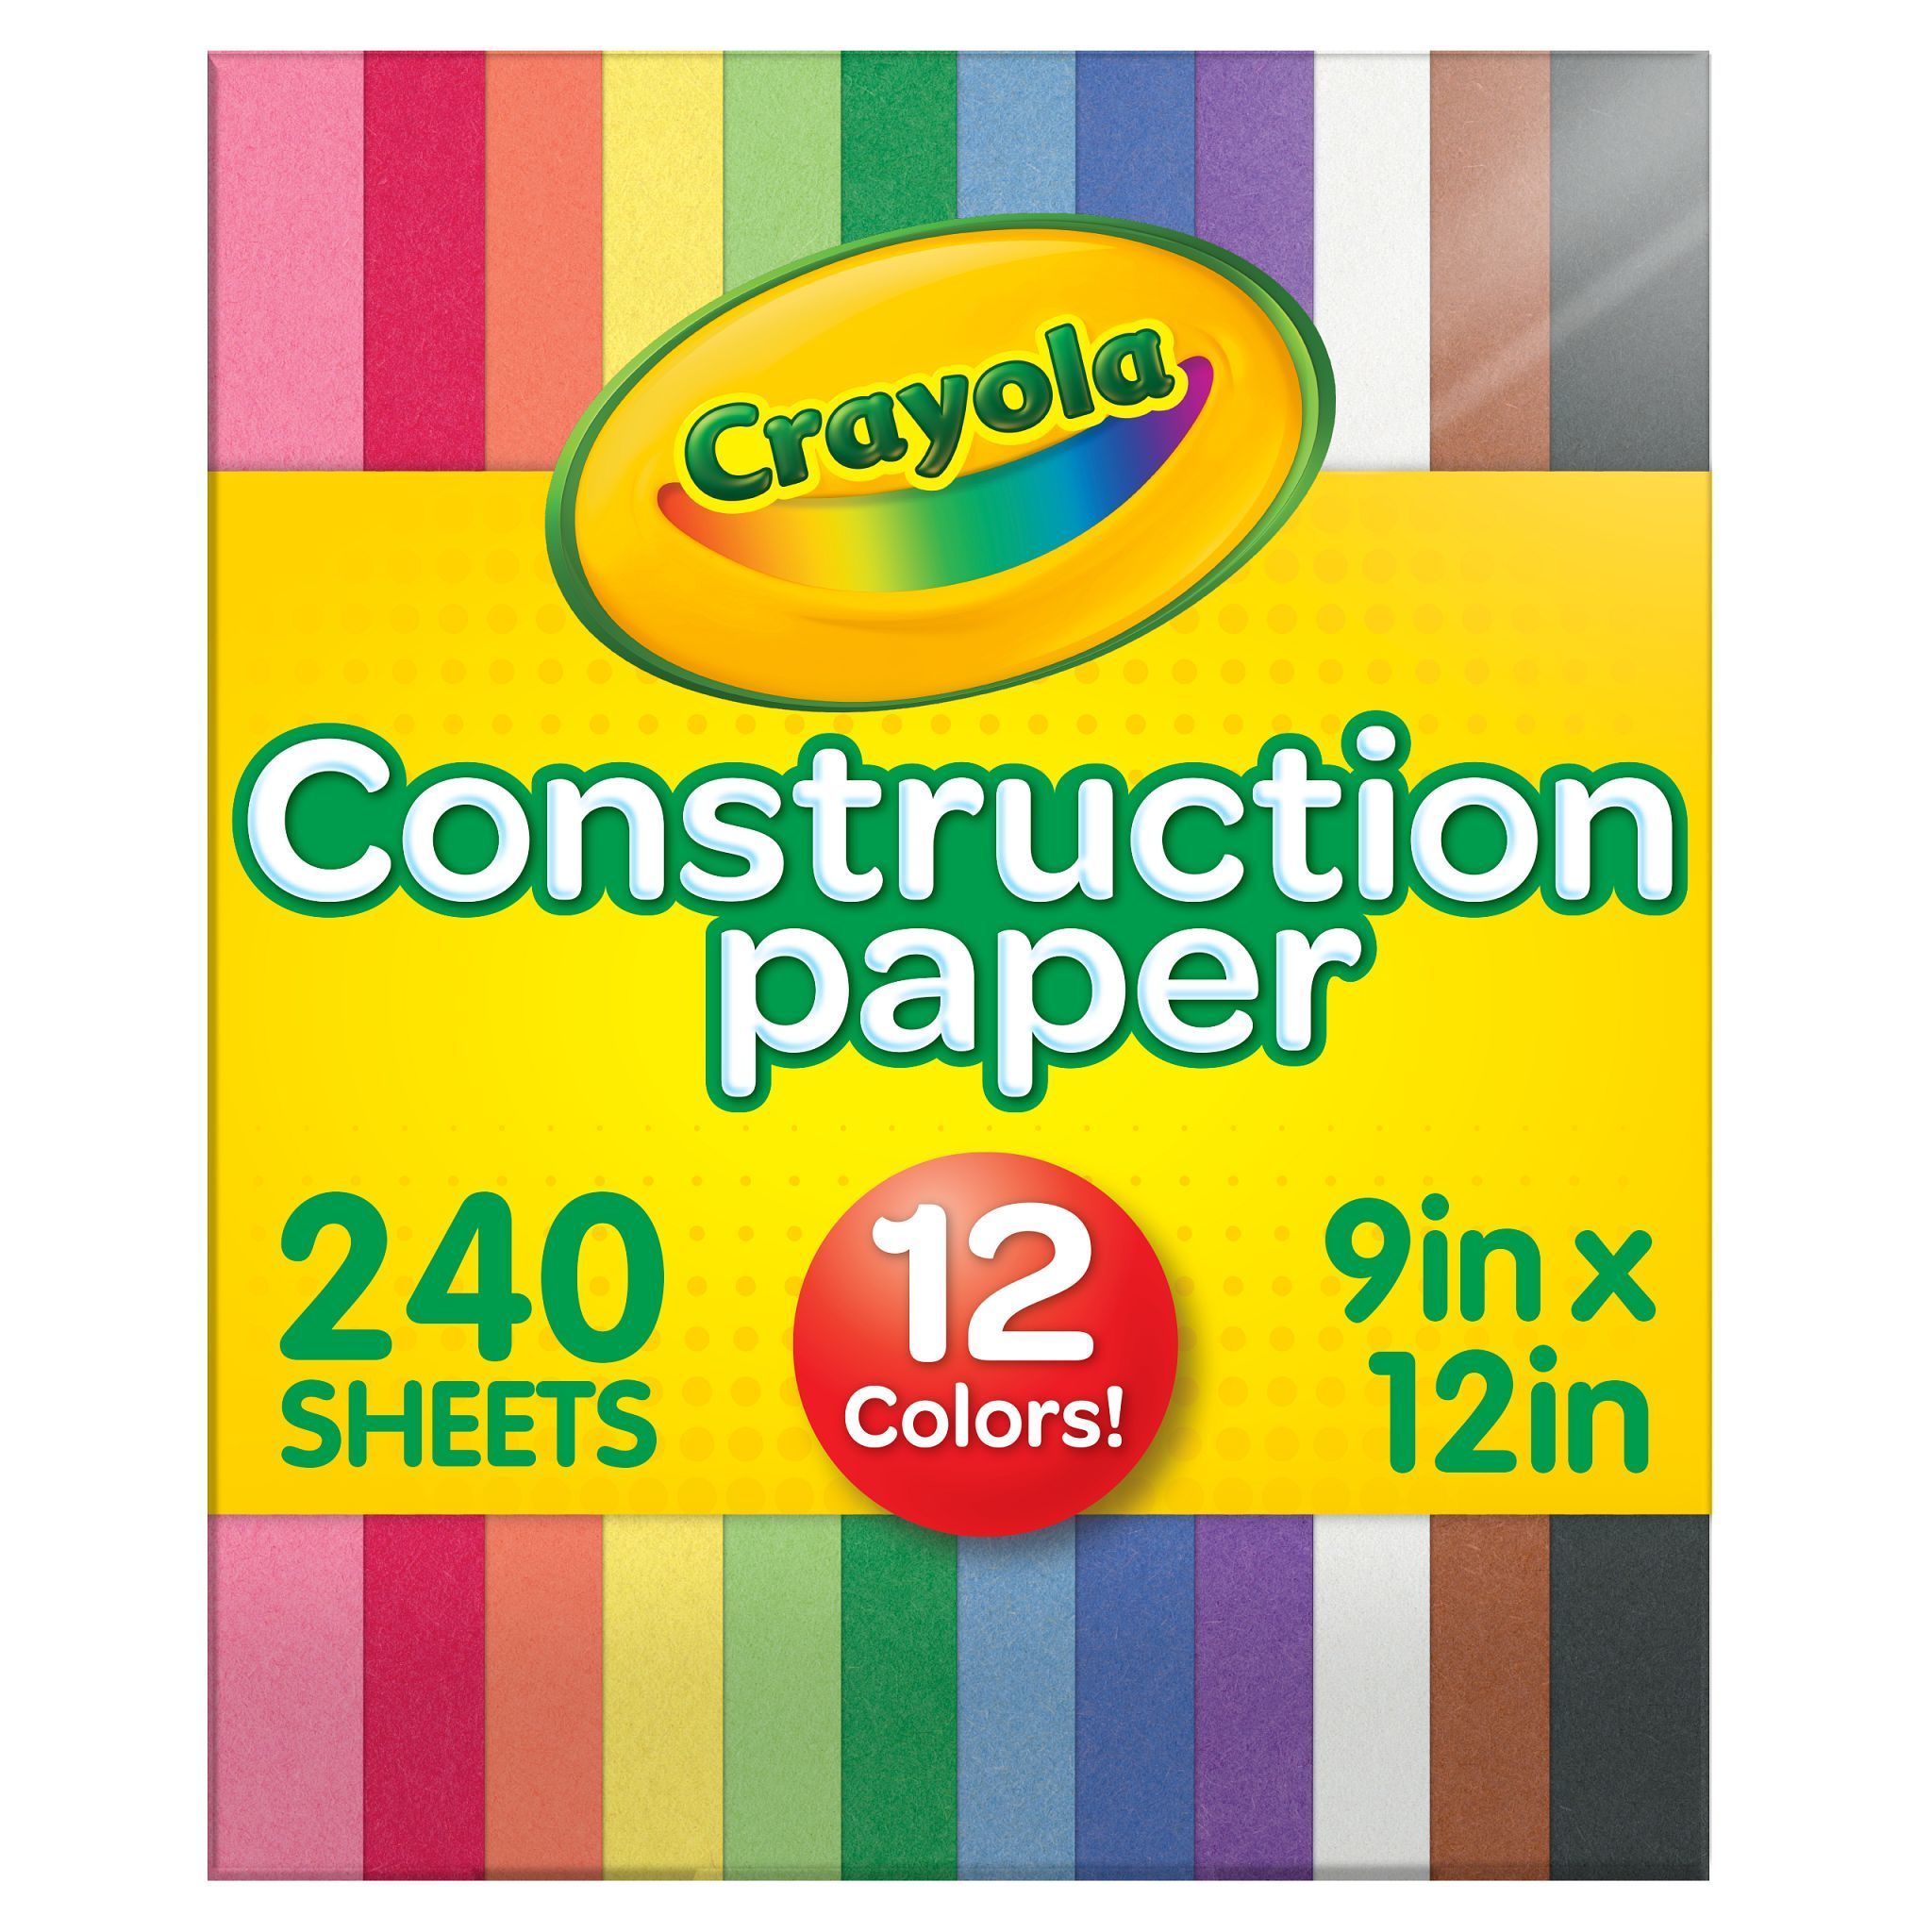 Crayola Construction Paper in 10 Assorted Colors, School Supplies, Beginner Child, 240 Sheets - image 1 of 8